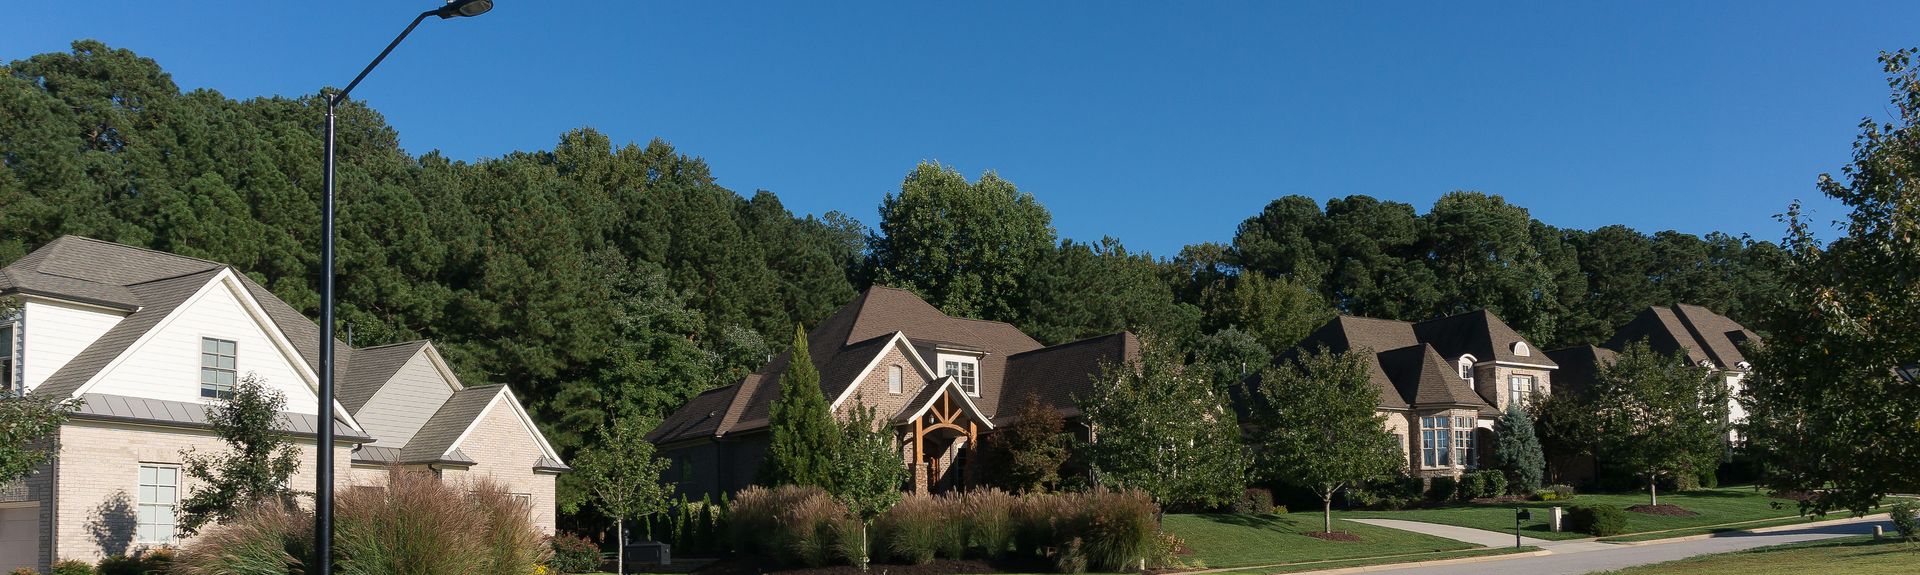 Top Apex Nc House Rentals From 49 Night Vrbo